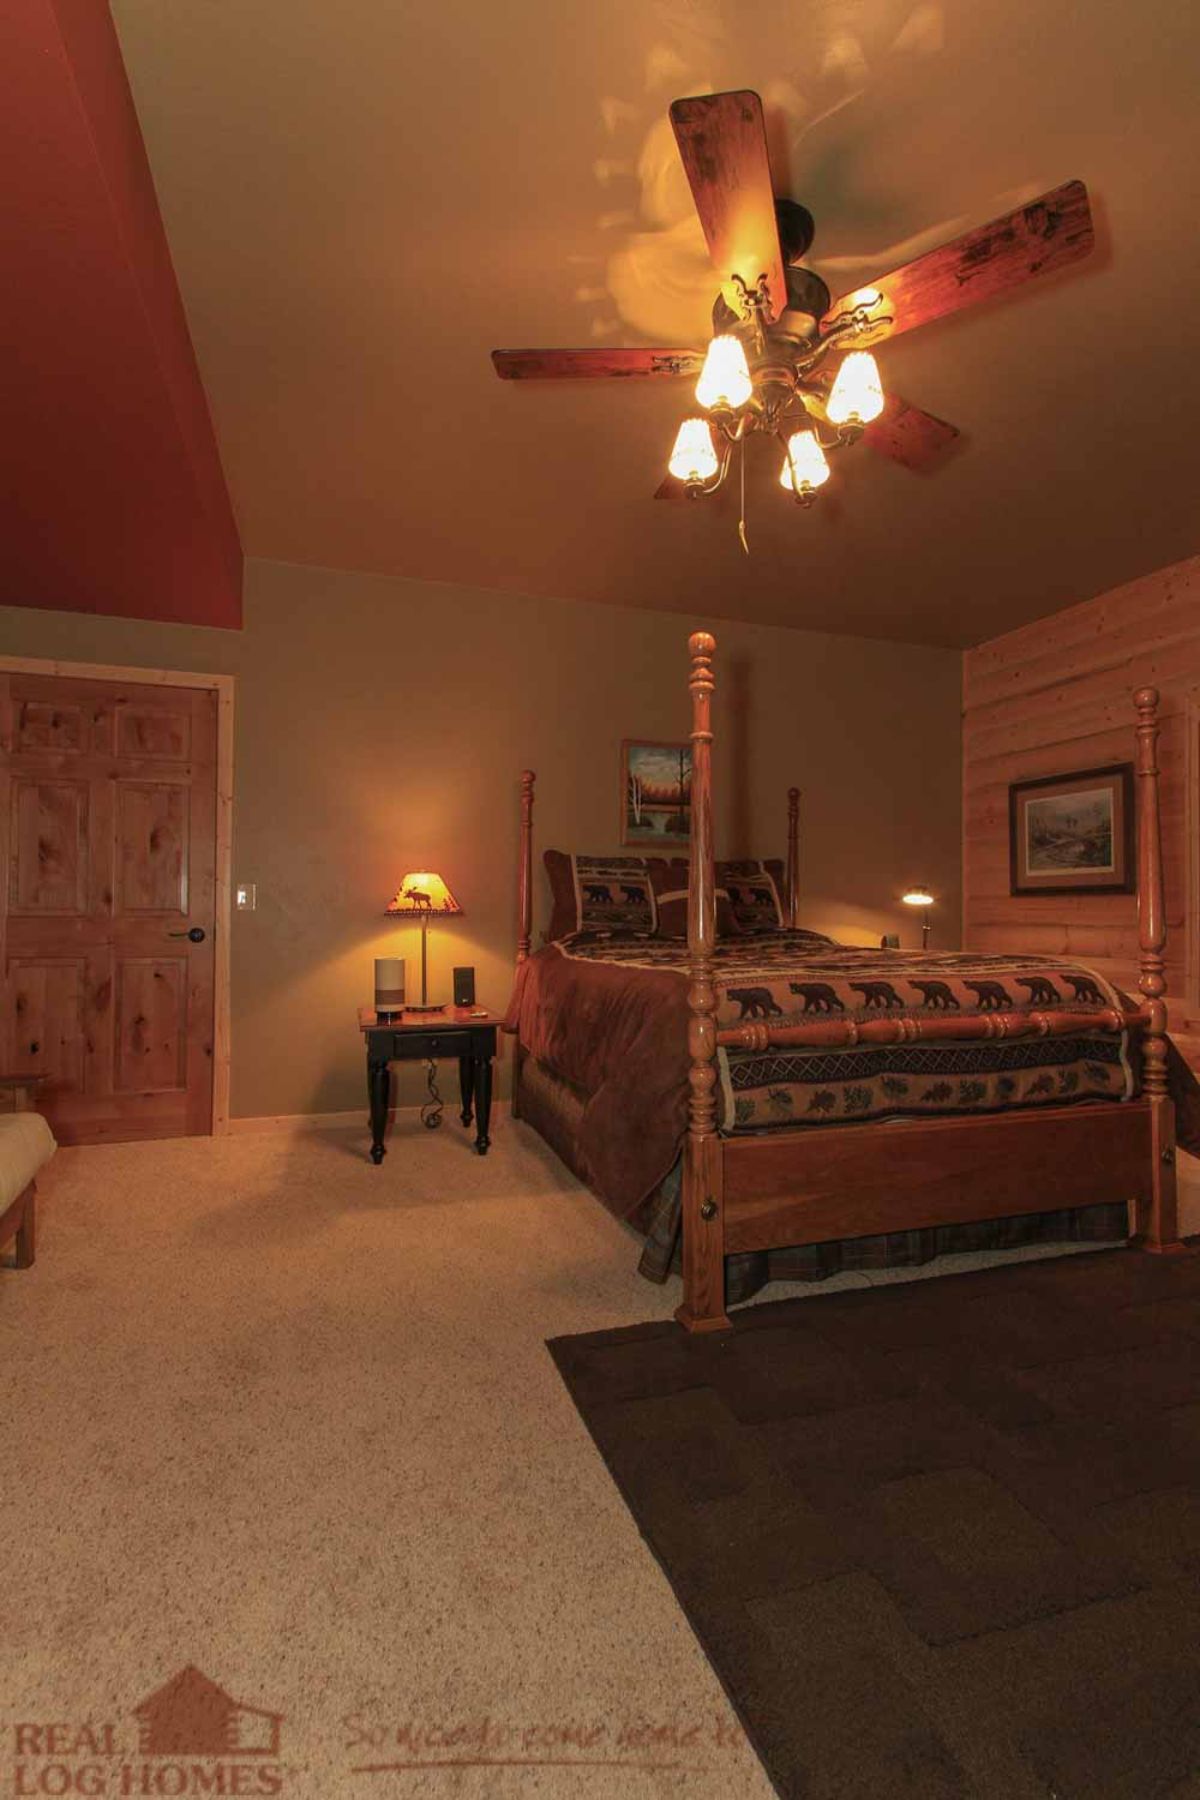 canopy bed against wall of log cabin bedroom